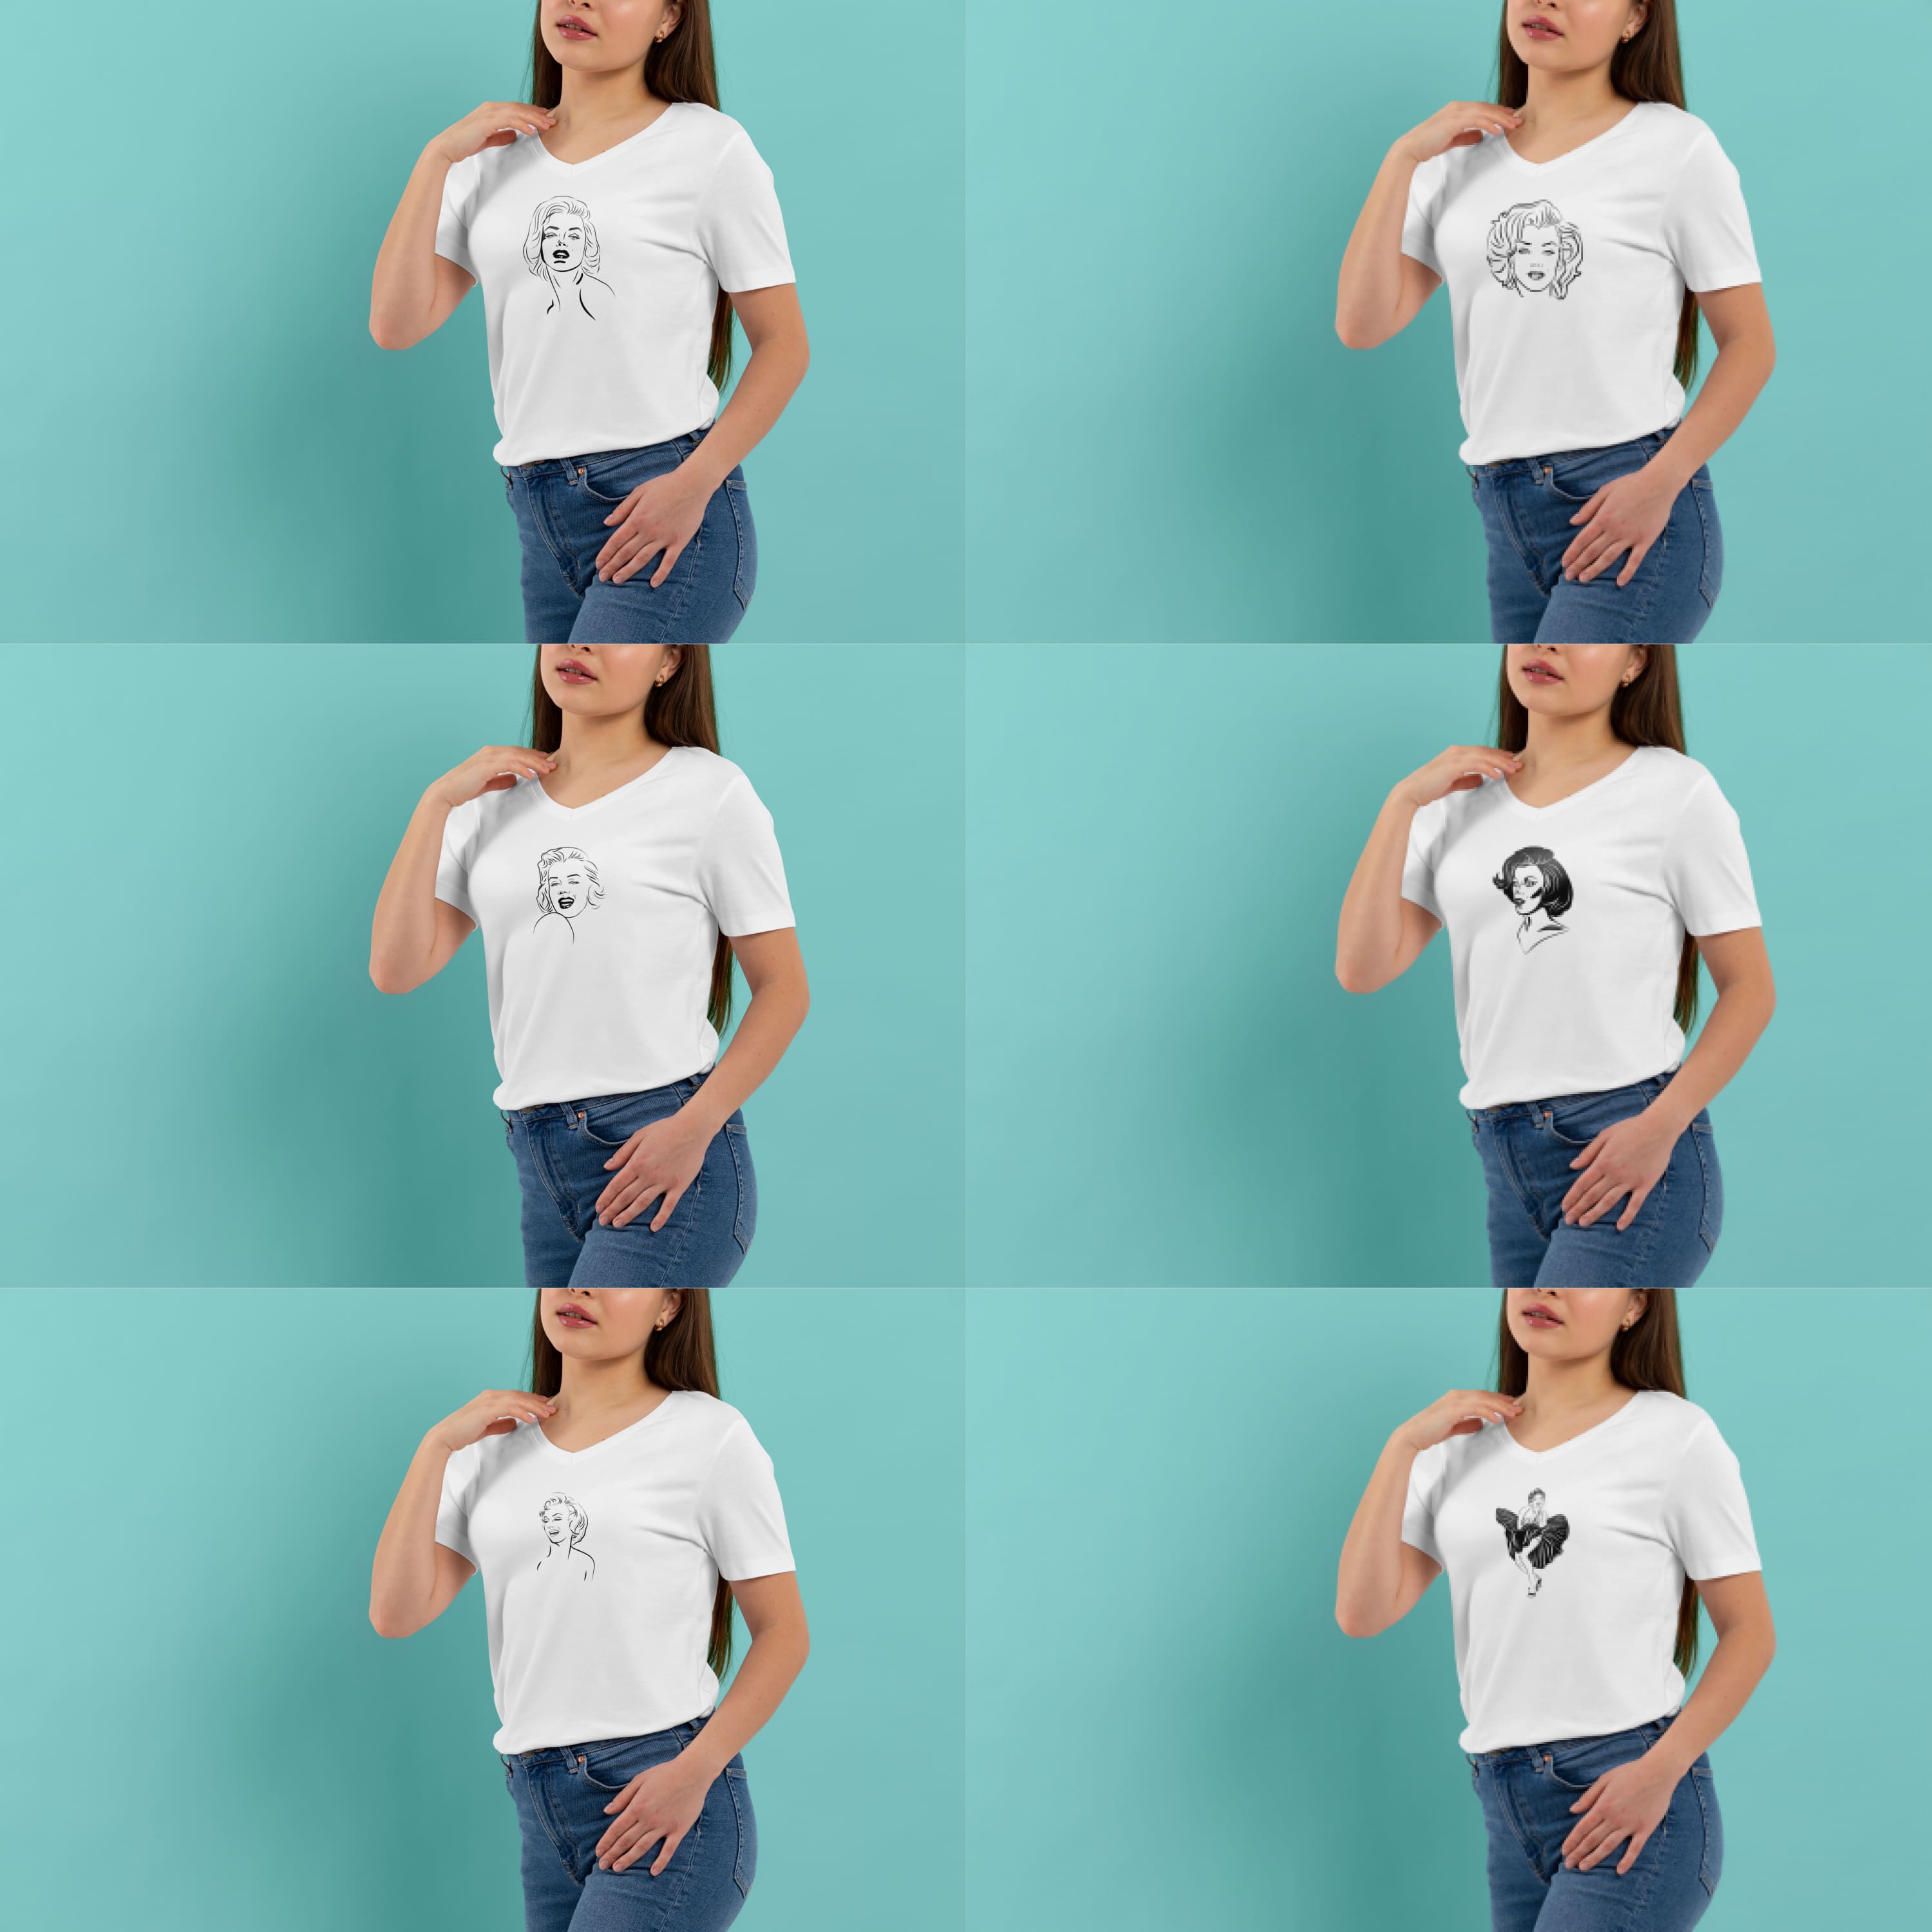 A collection of images of t-shirts with an irresistible vinyl print of Marilyn Monroe.